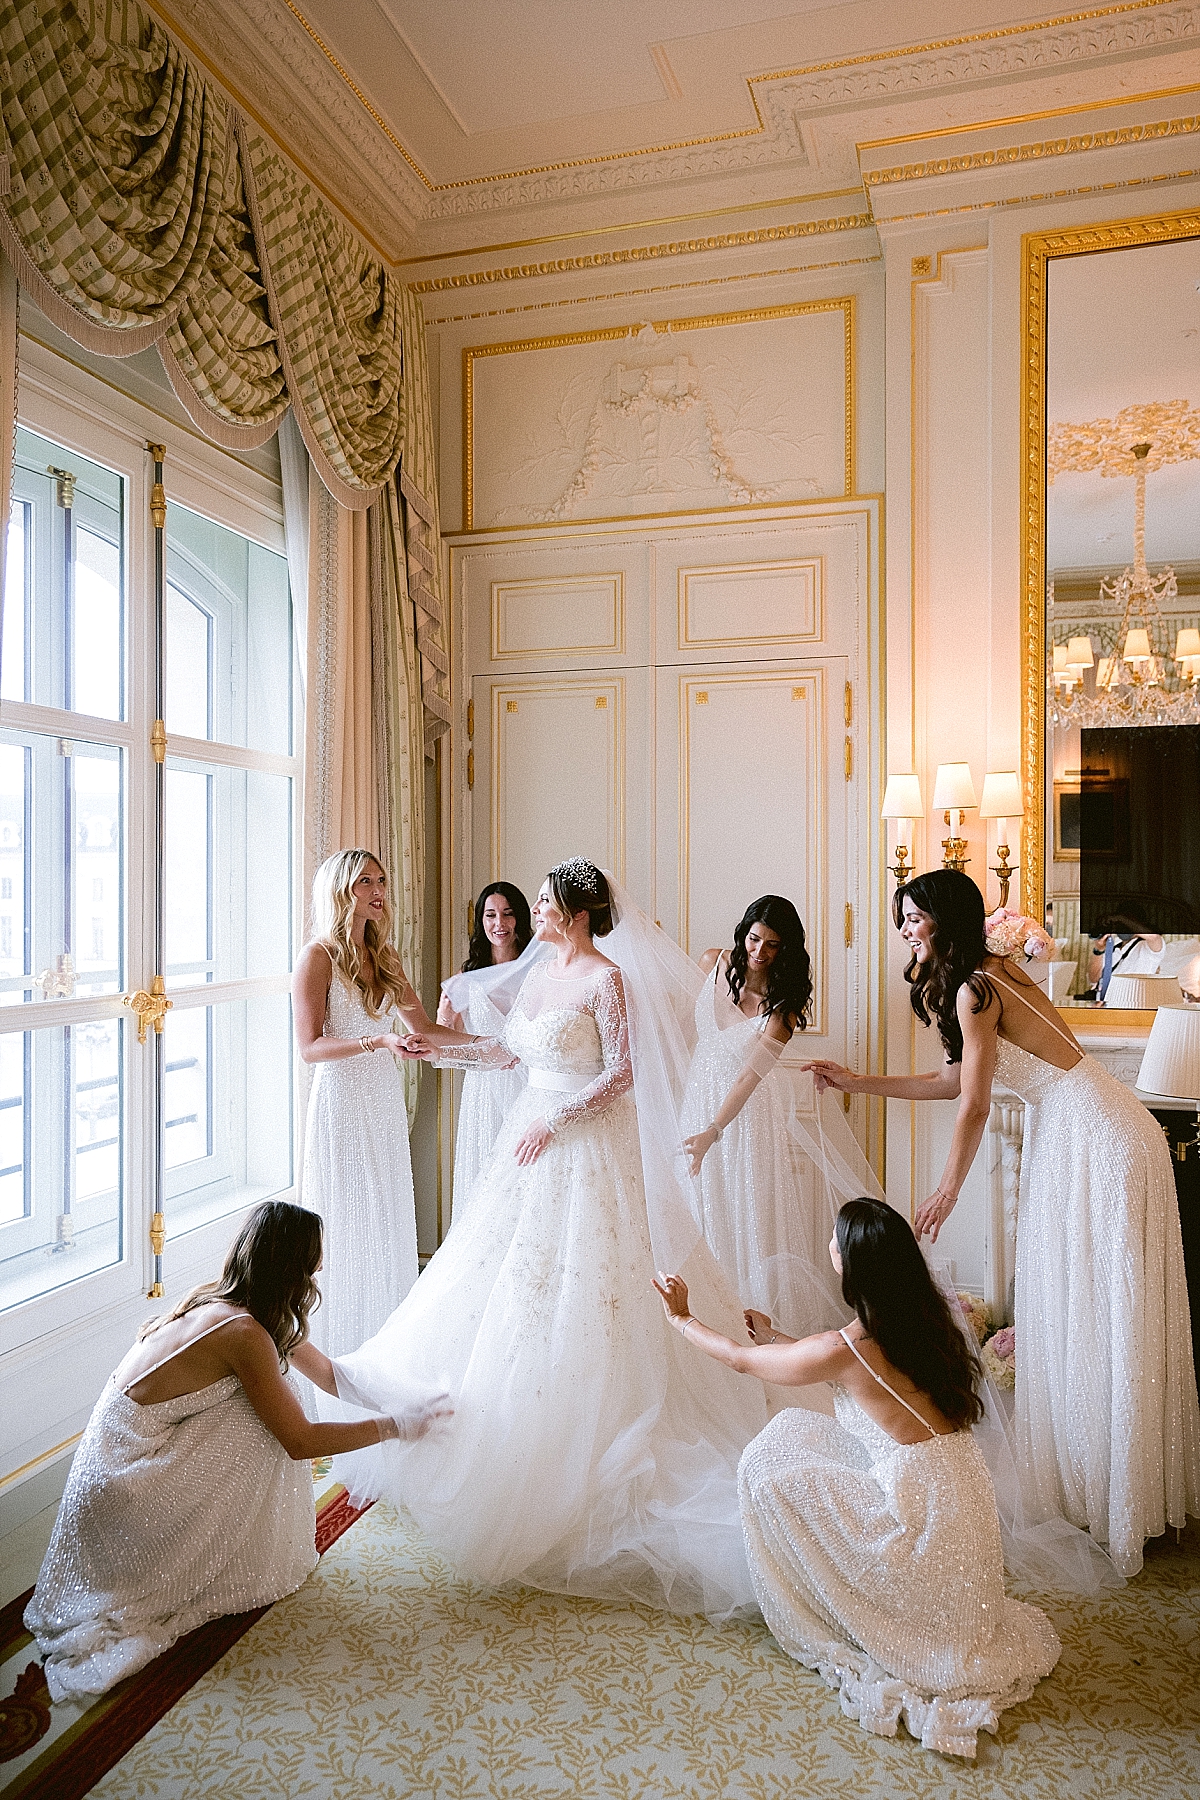 Wedding at Ritz Paris  Give meaning to your wedding photos in Paris.